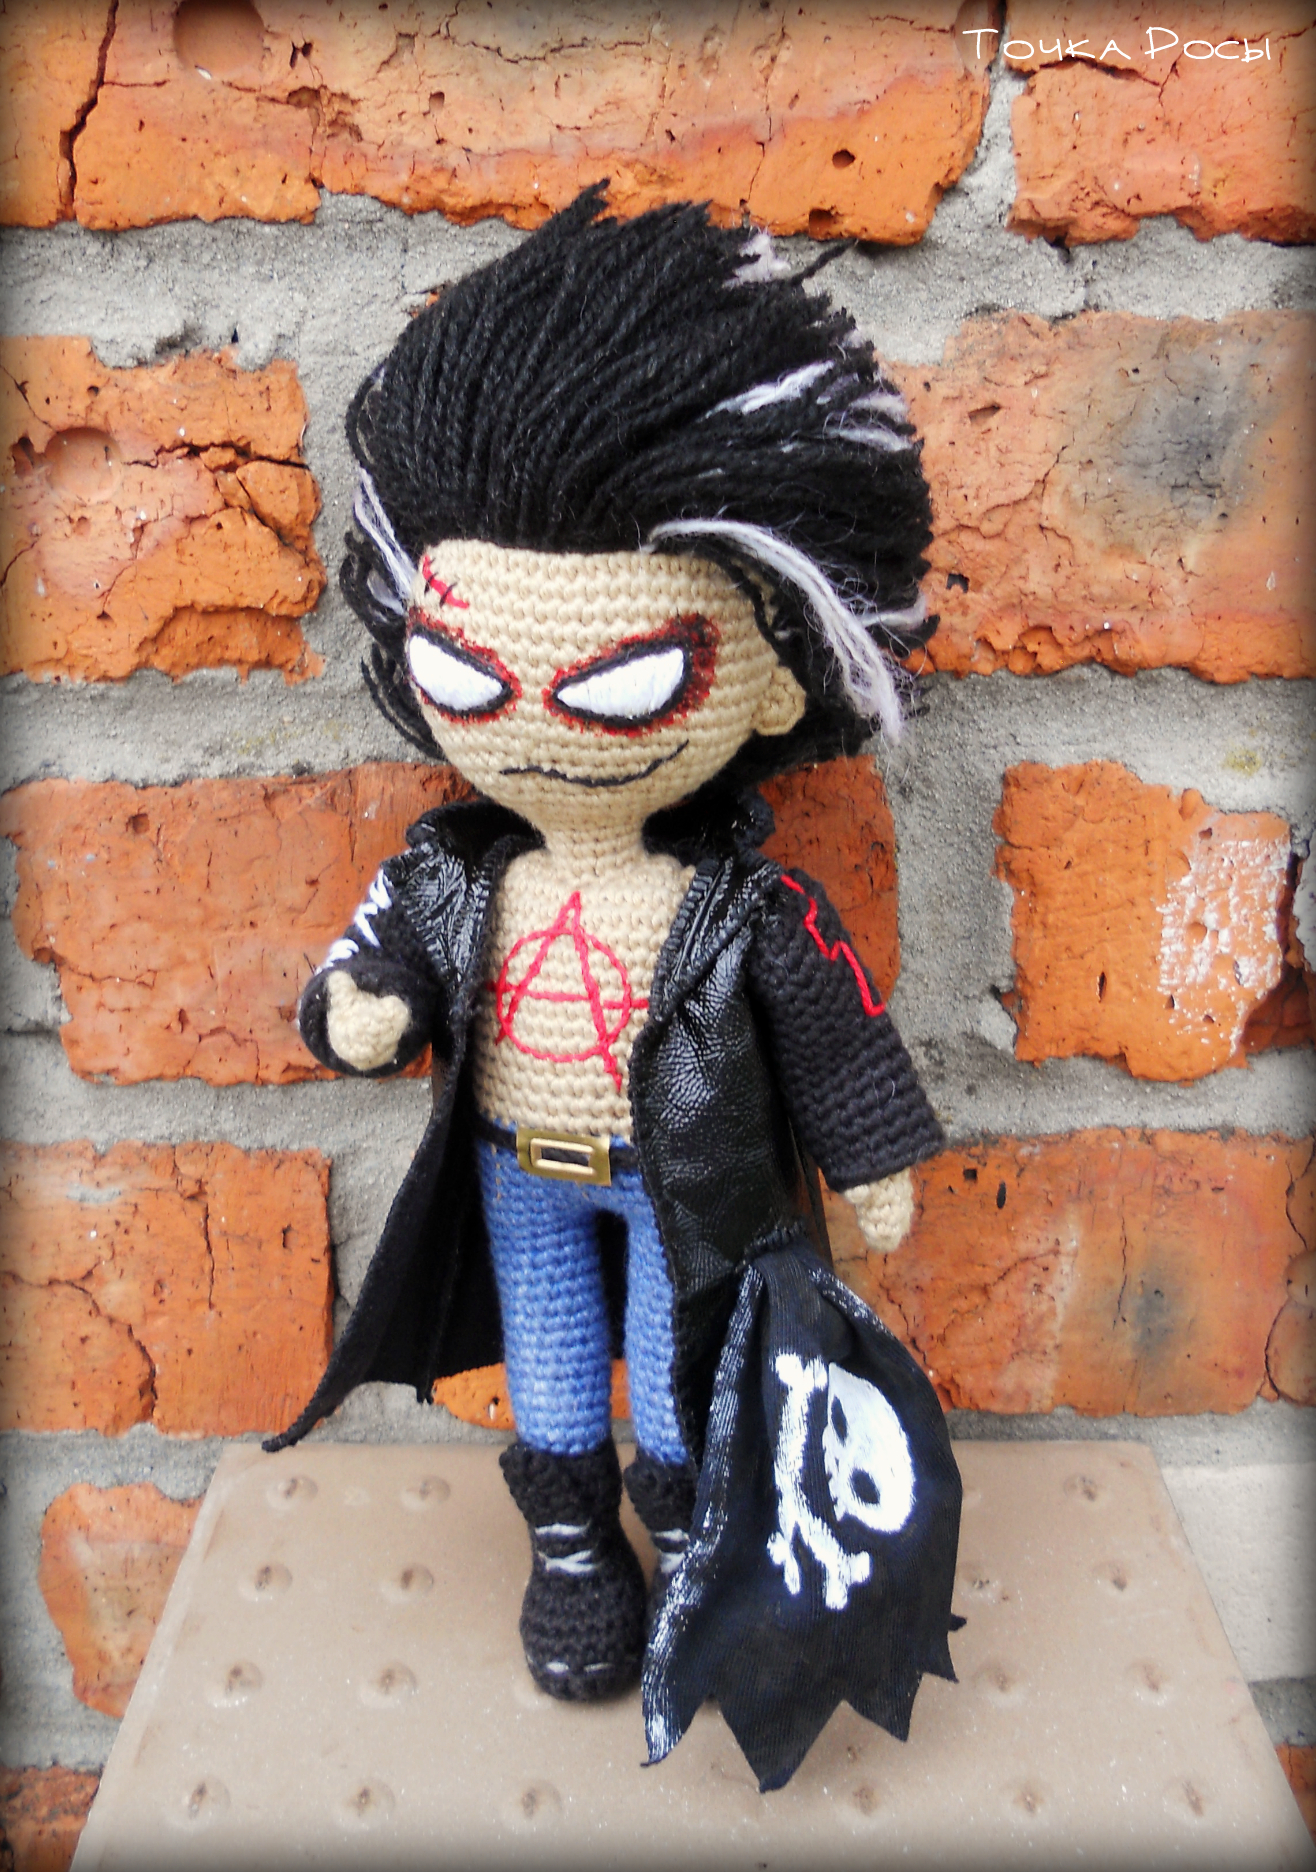 Dead anarchist. Knitted doll - My, King and the Clown, Dead Anarchist, Crochet, Knitted toys, Amigurumi, Interior doll, Sorcerer's Doll, Punk rock, Longpost, Needlework without process